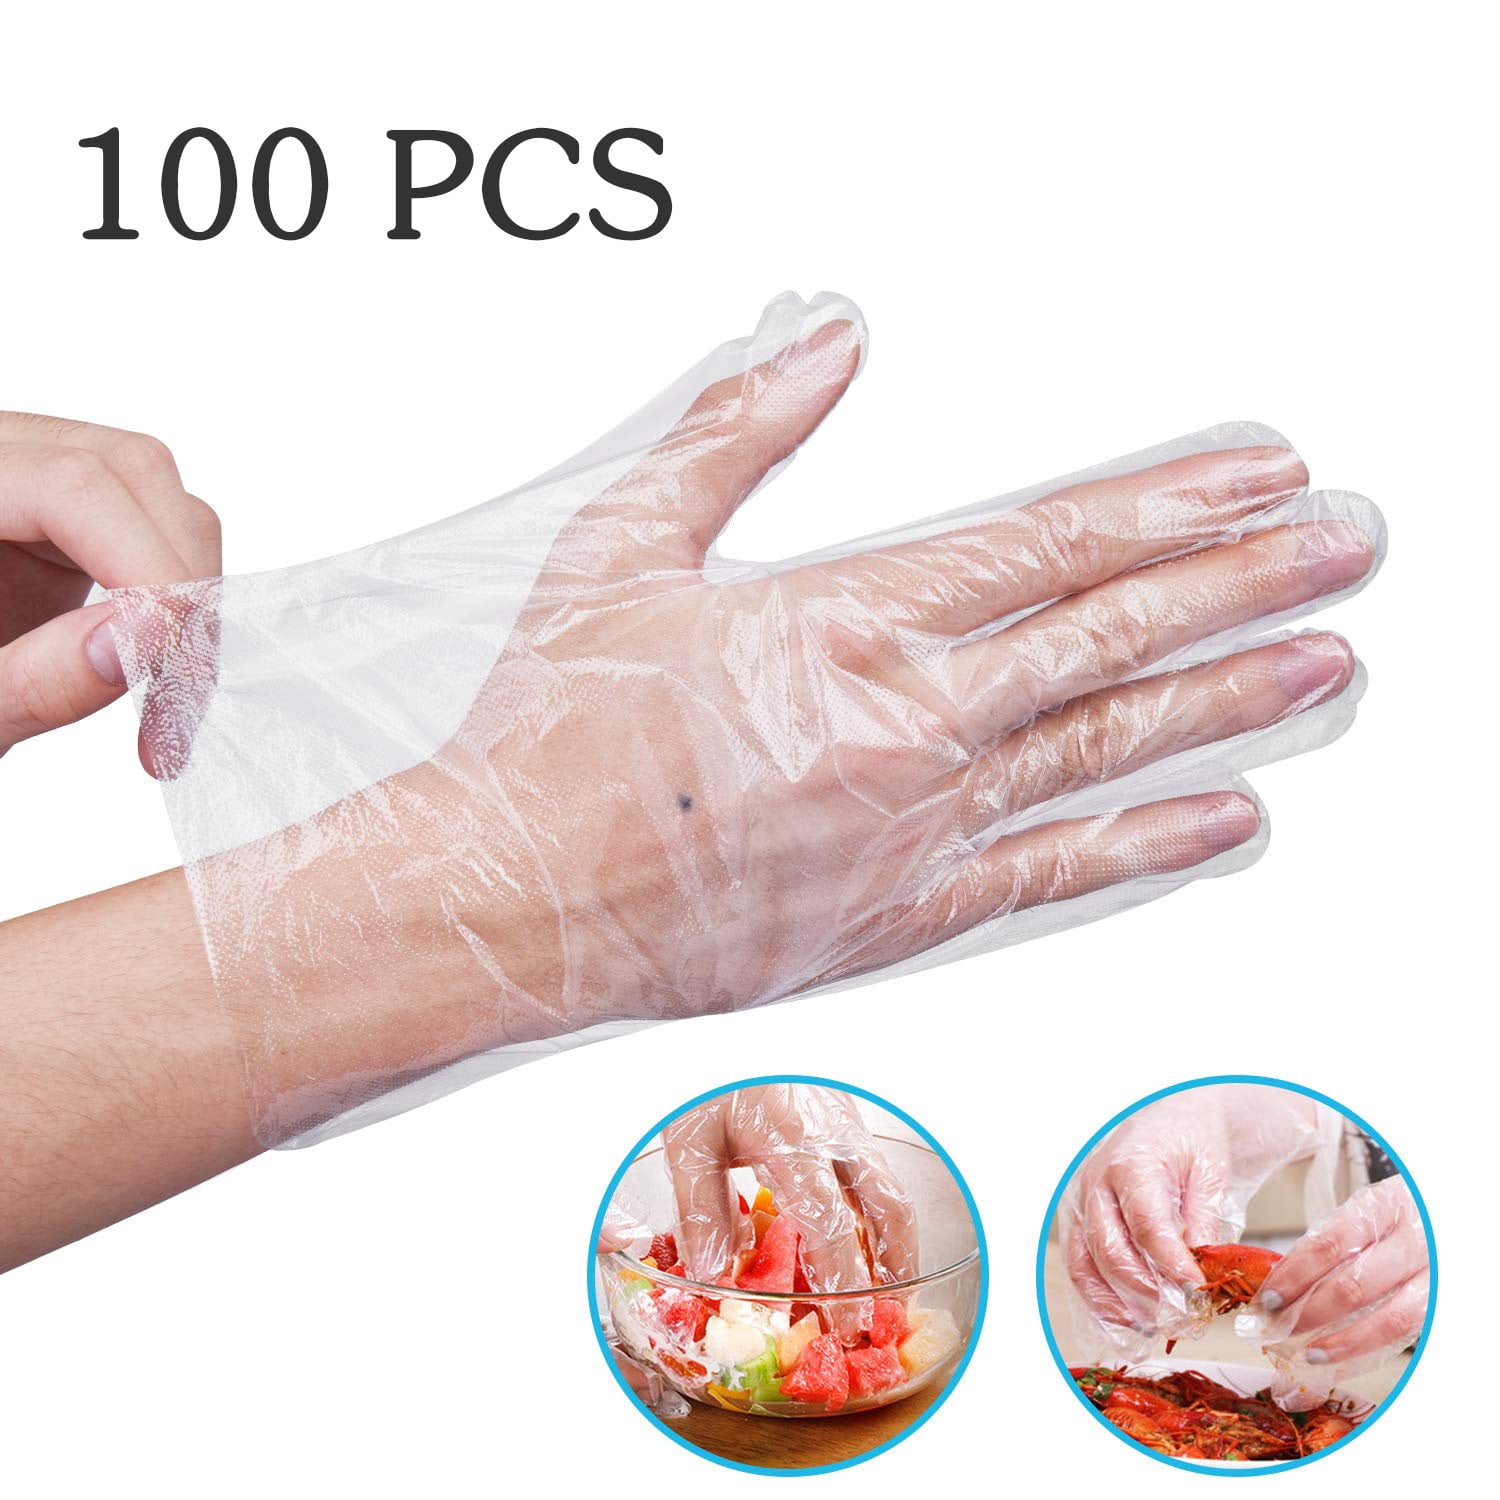 500 POLY GLOVES Single Use Food Cleaning Home Catering Beauty Protection 